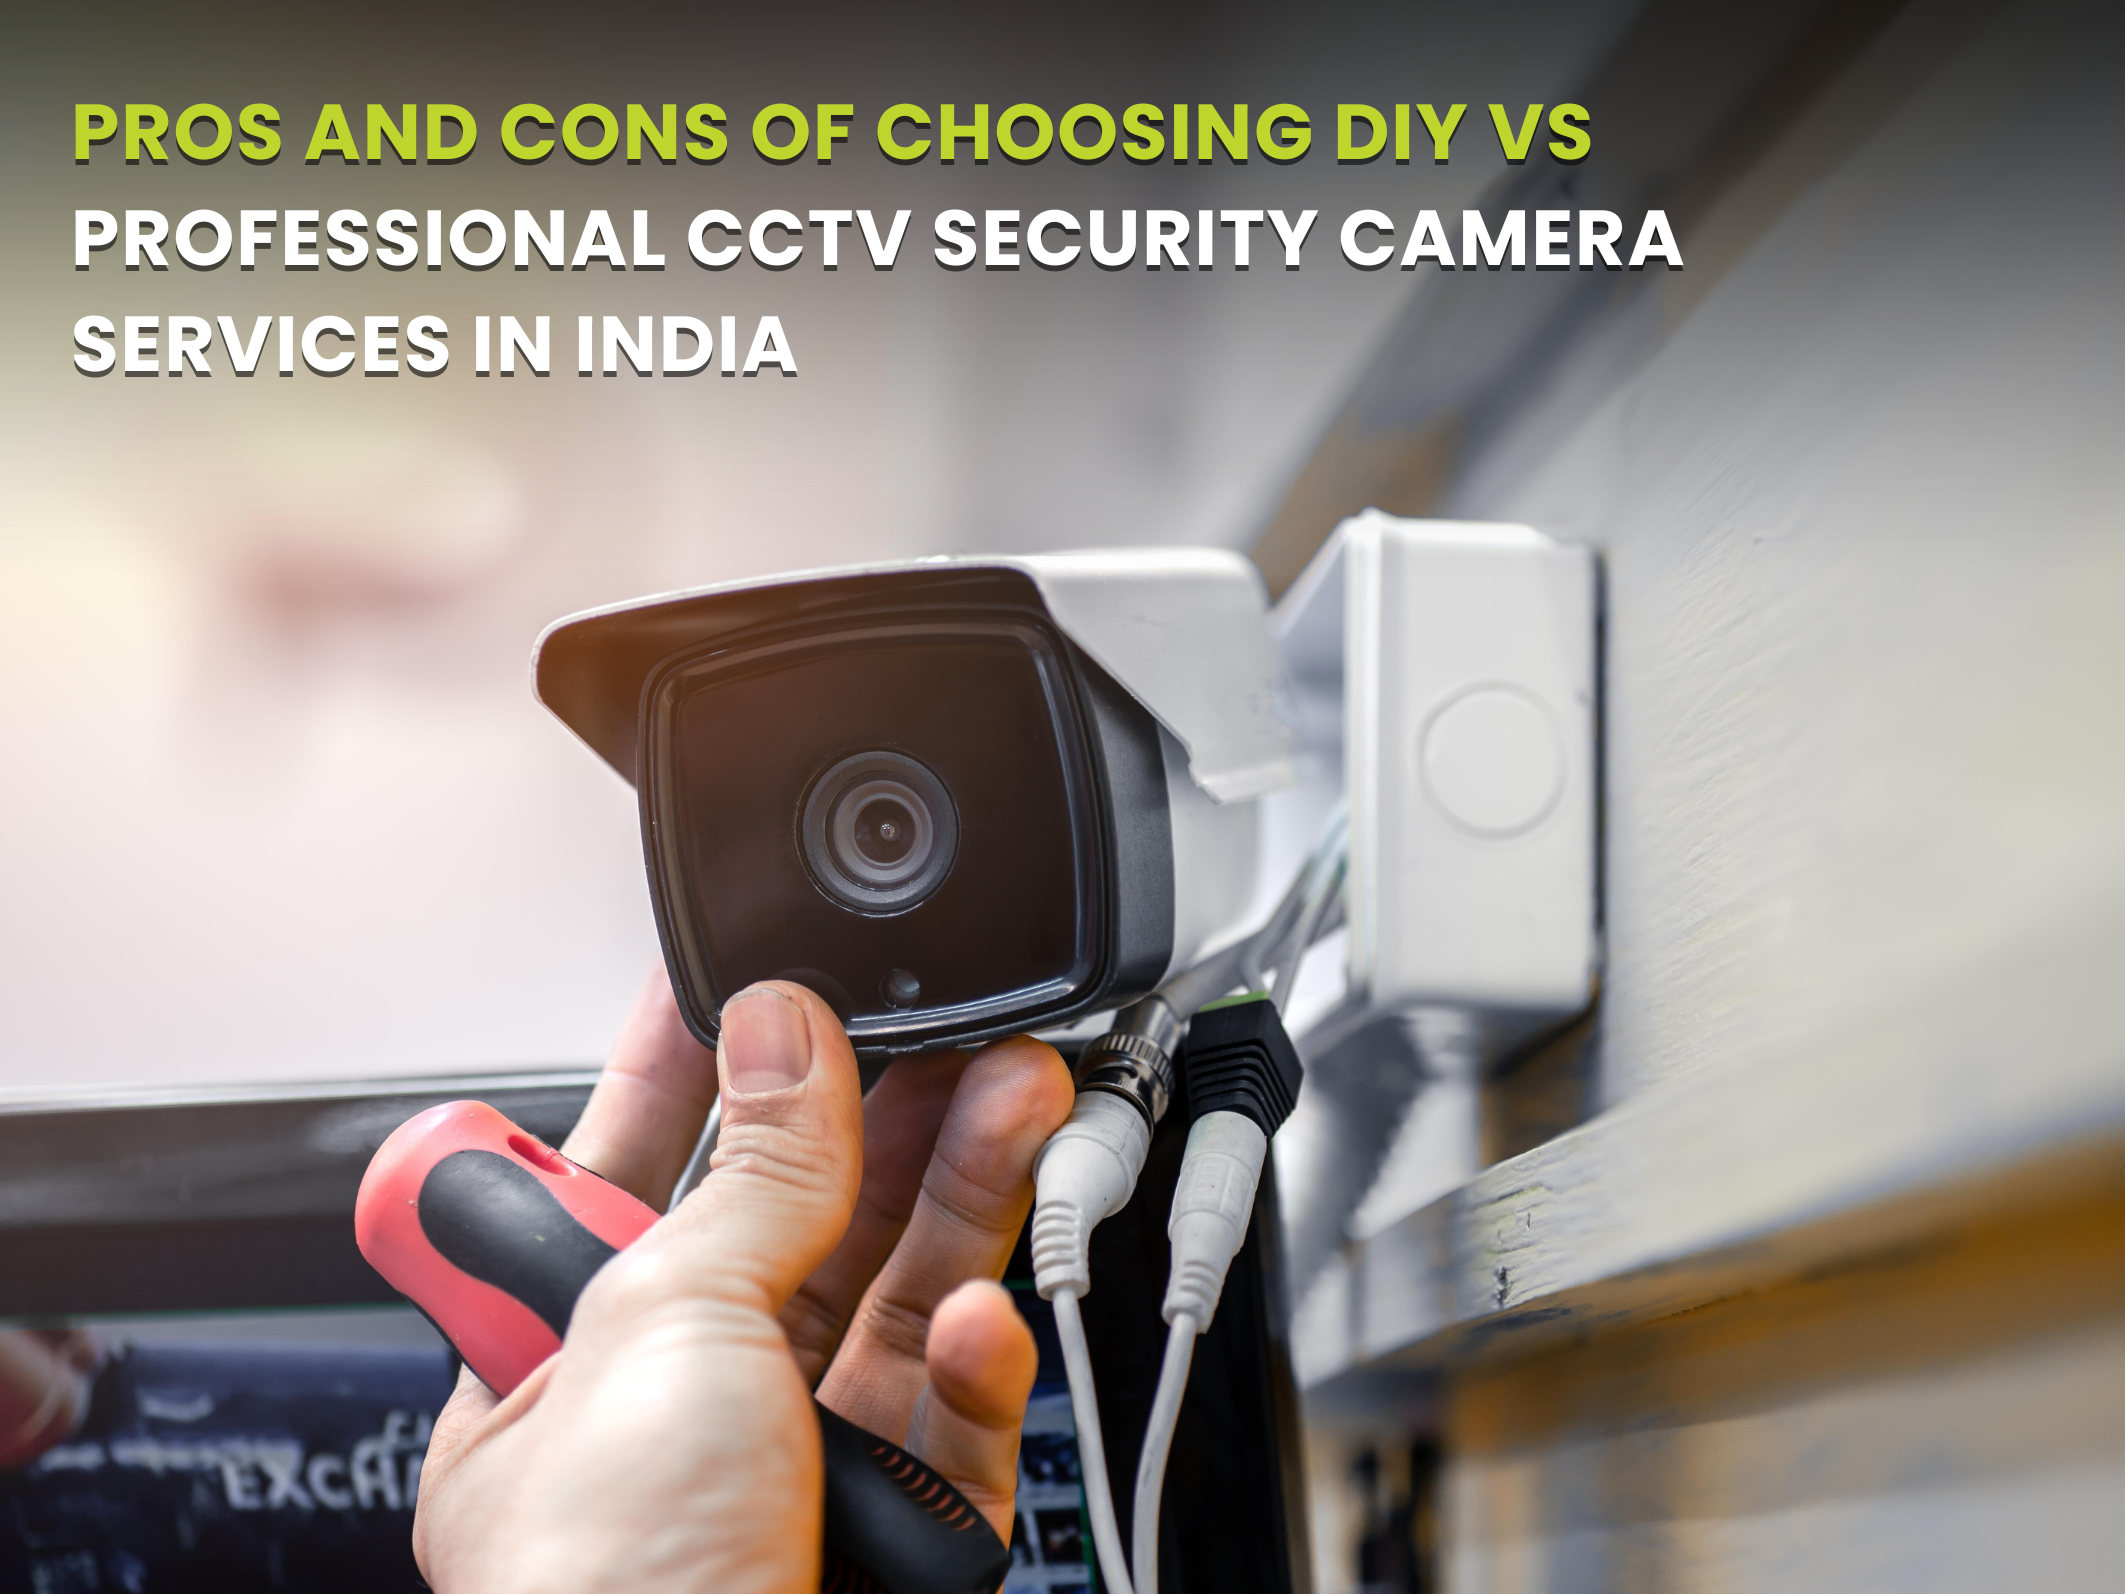 Event Wifi Internet - PROS AND CONS OF CHOOSING DIY VS. PROFESSIONAL CCTV SECURITY CAMERA SERVICES IN INDIA